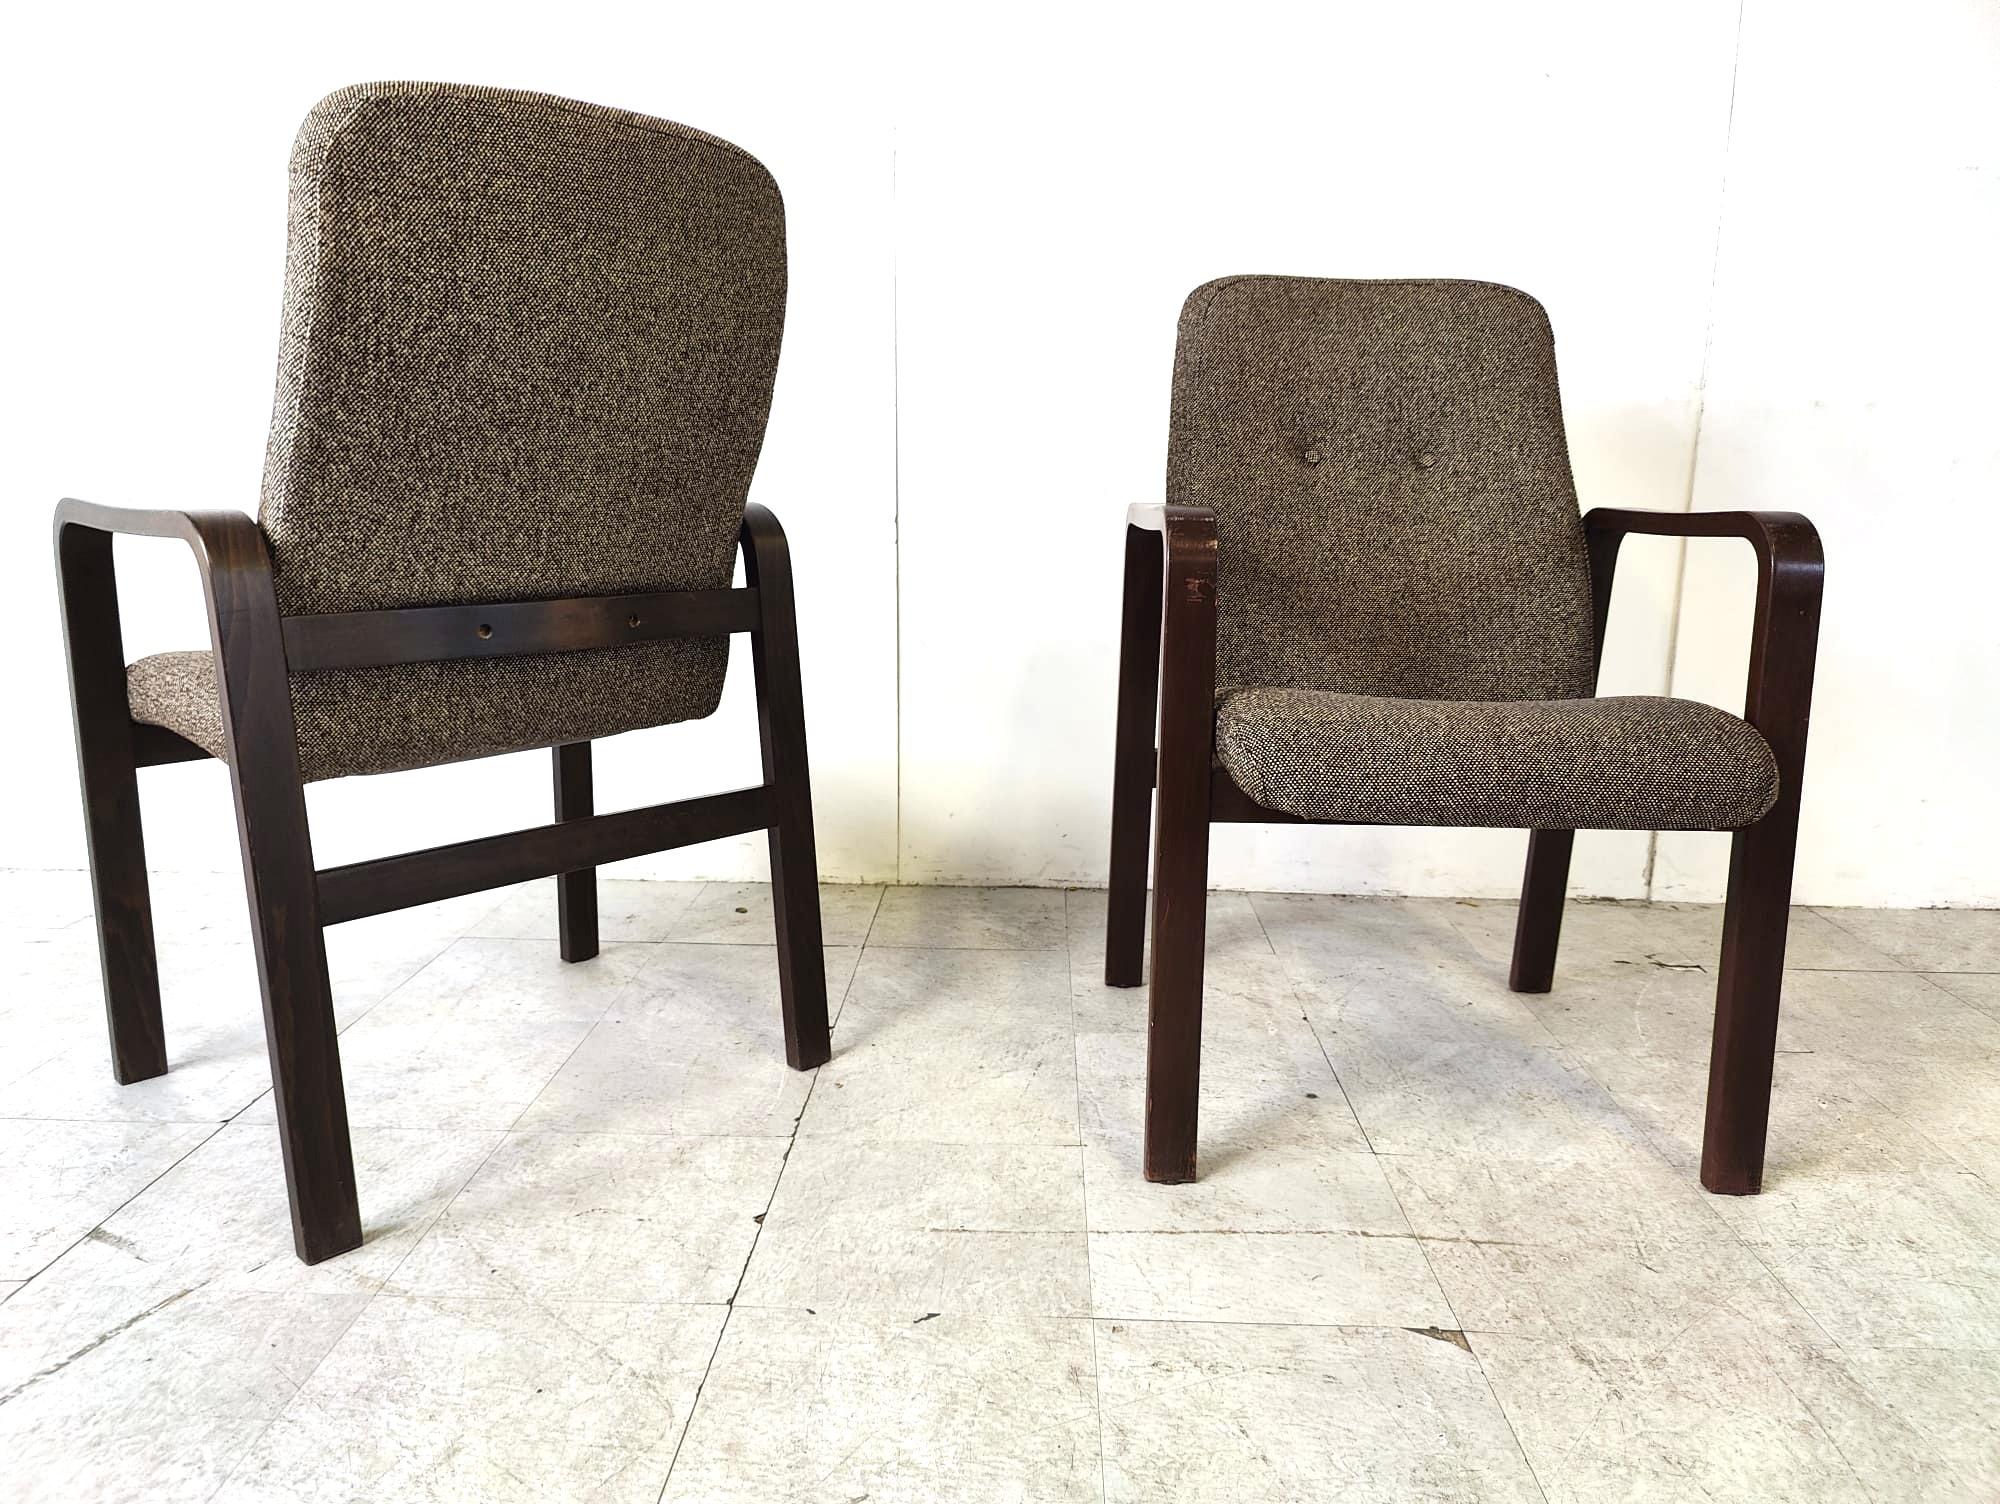 Vintage bentwood armchairs, 1970s For Sale 3